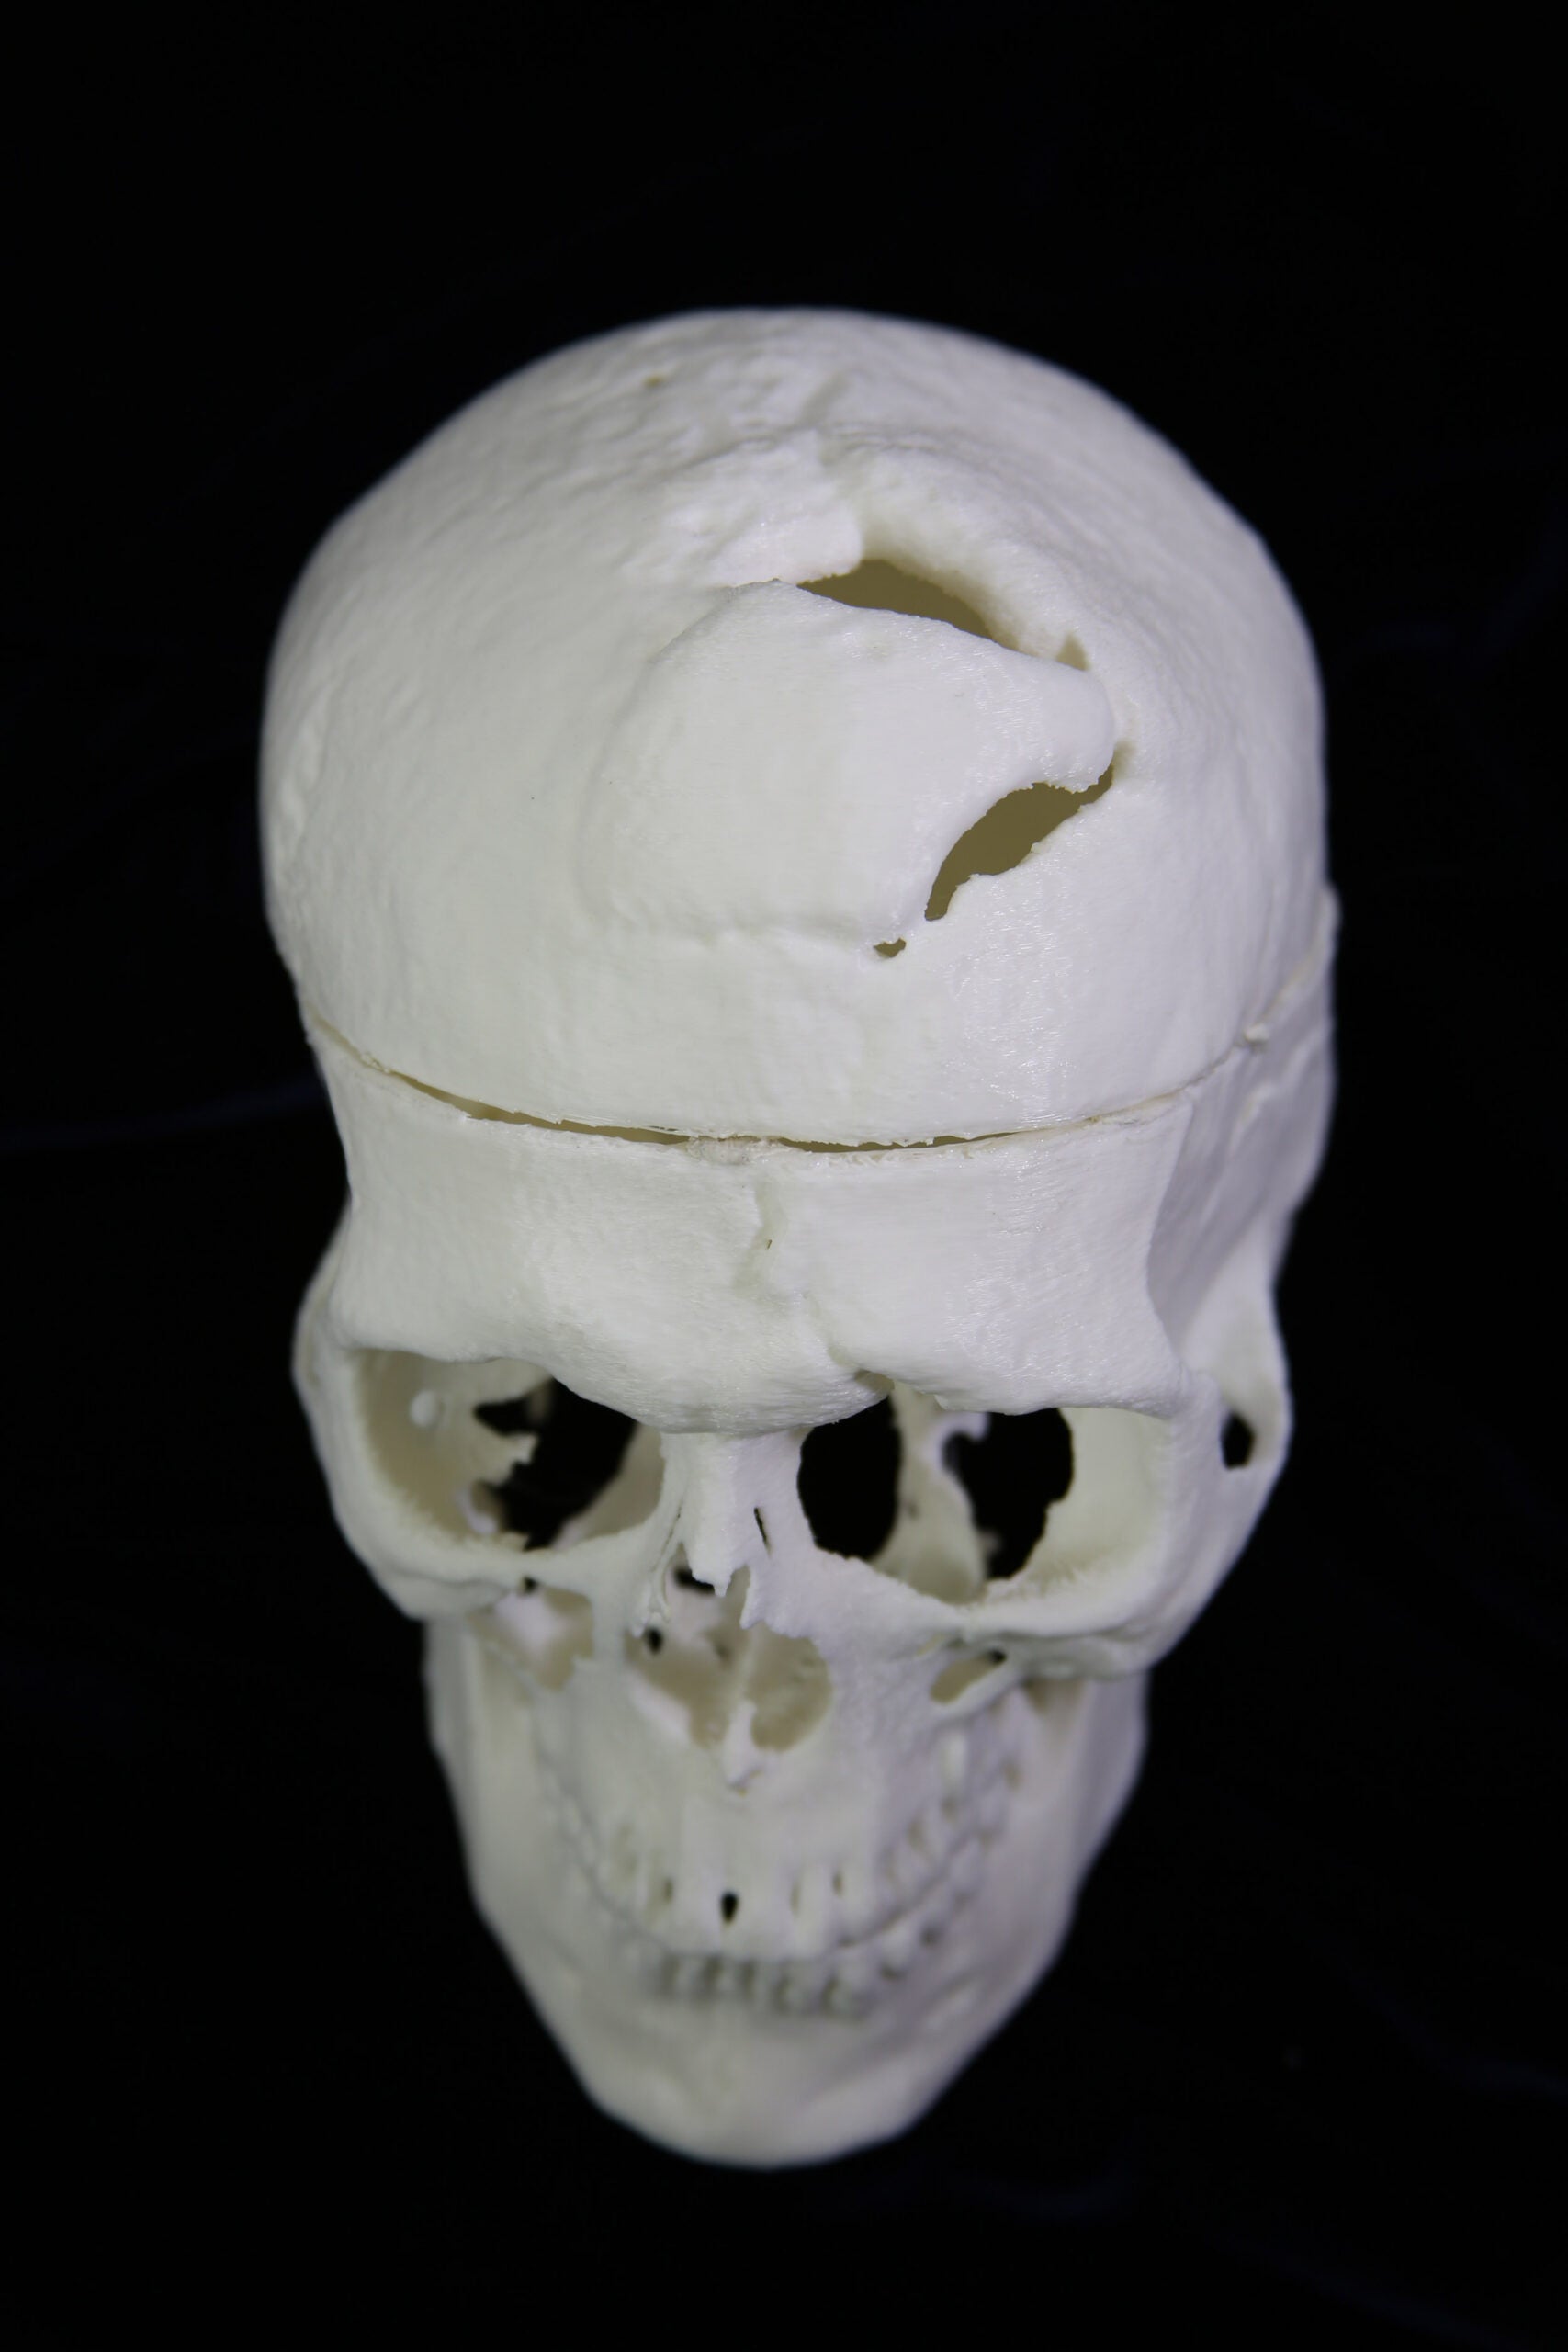 3D printed human skull with a hole in the top